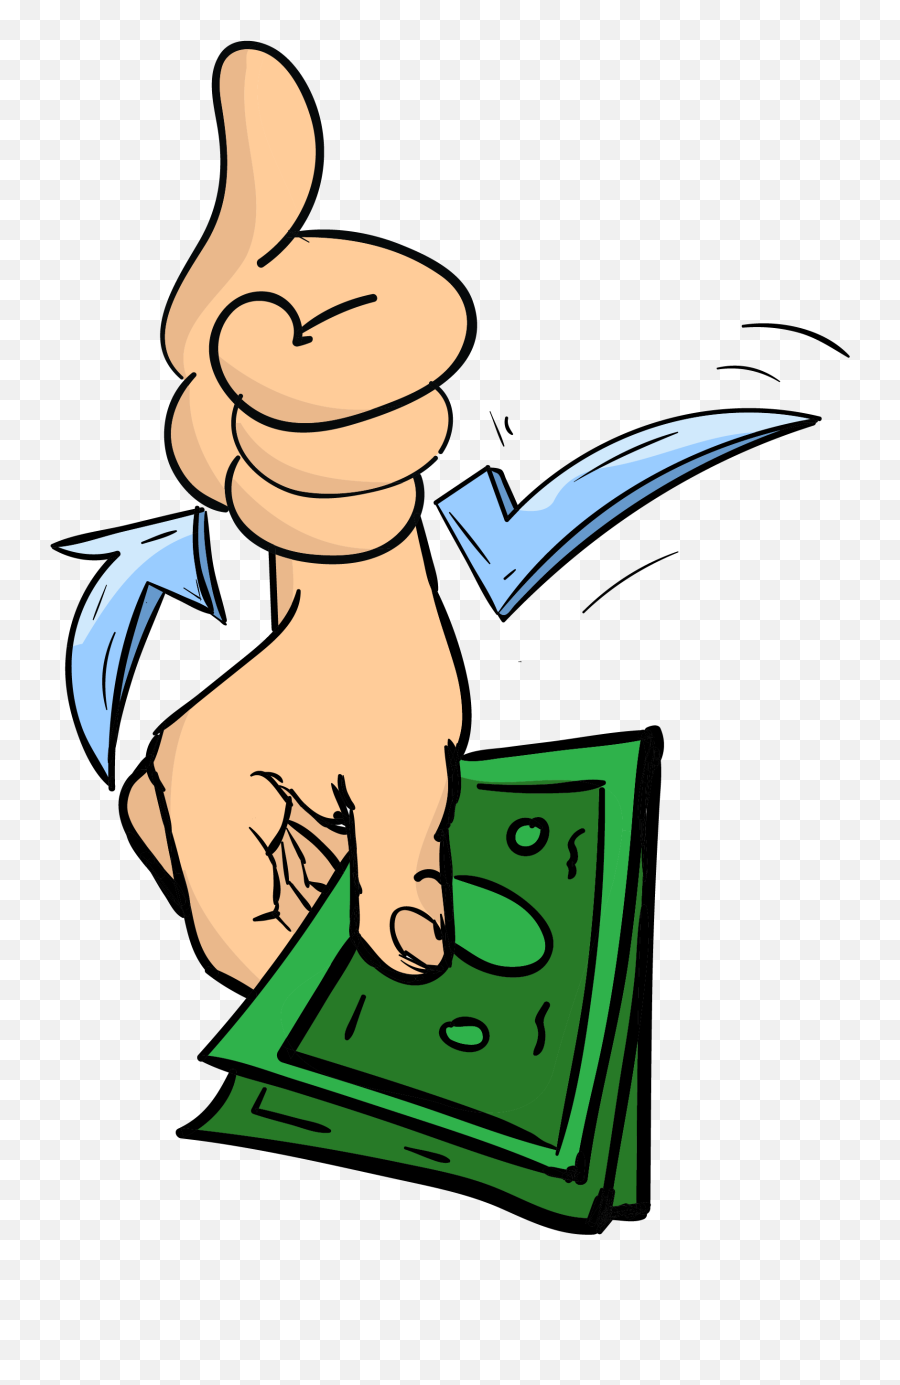 Clipart Of The Thumbs Up And Money - Peniaze Obrázky Png Emoji,Thumbs Up Transparent